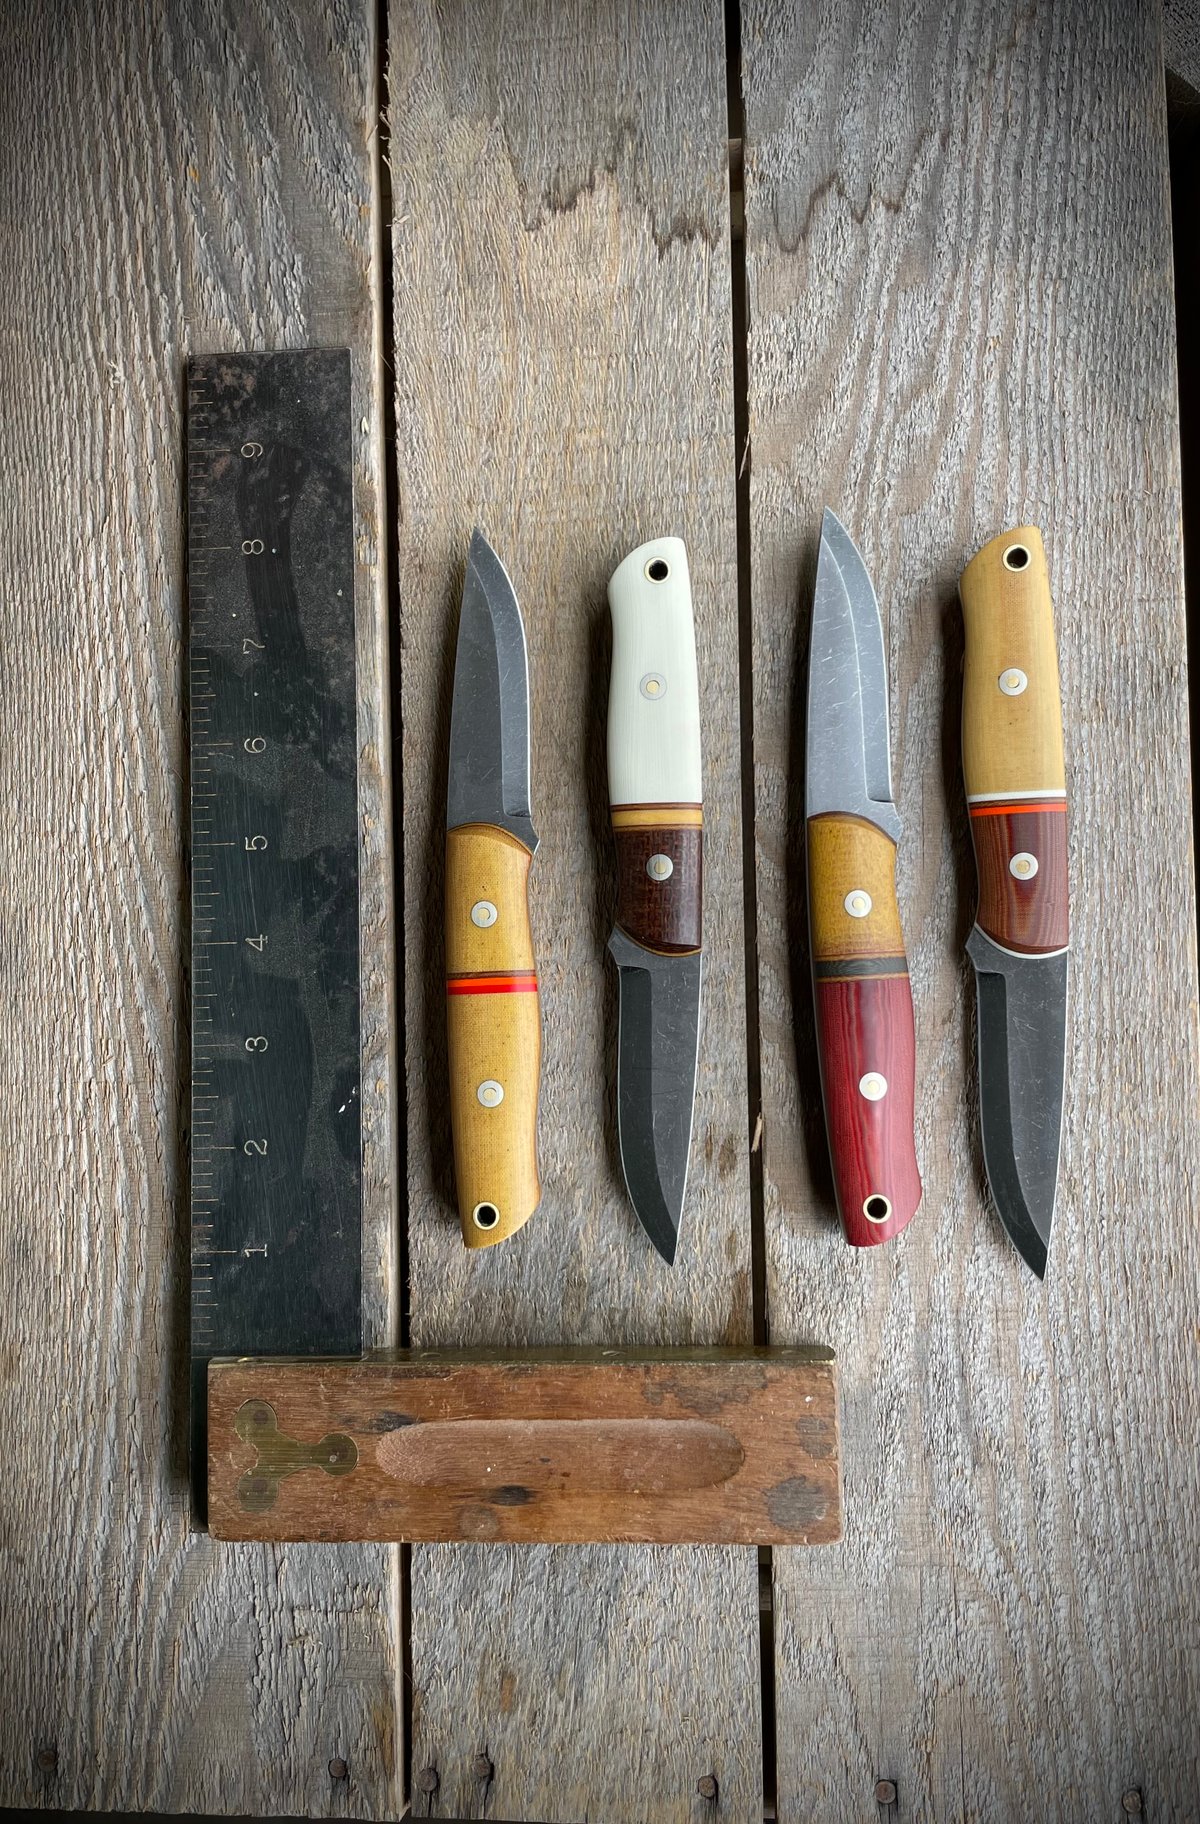 https://assets.bigcartel.com/product_images/21477c01-ee99-4586-8e7e-82fc2586e3ae/the-b-b-bushcrafter.jpg?auto=format&fit=max&w=1200